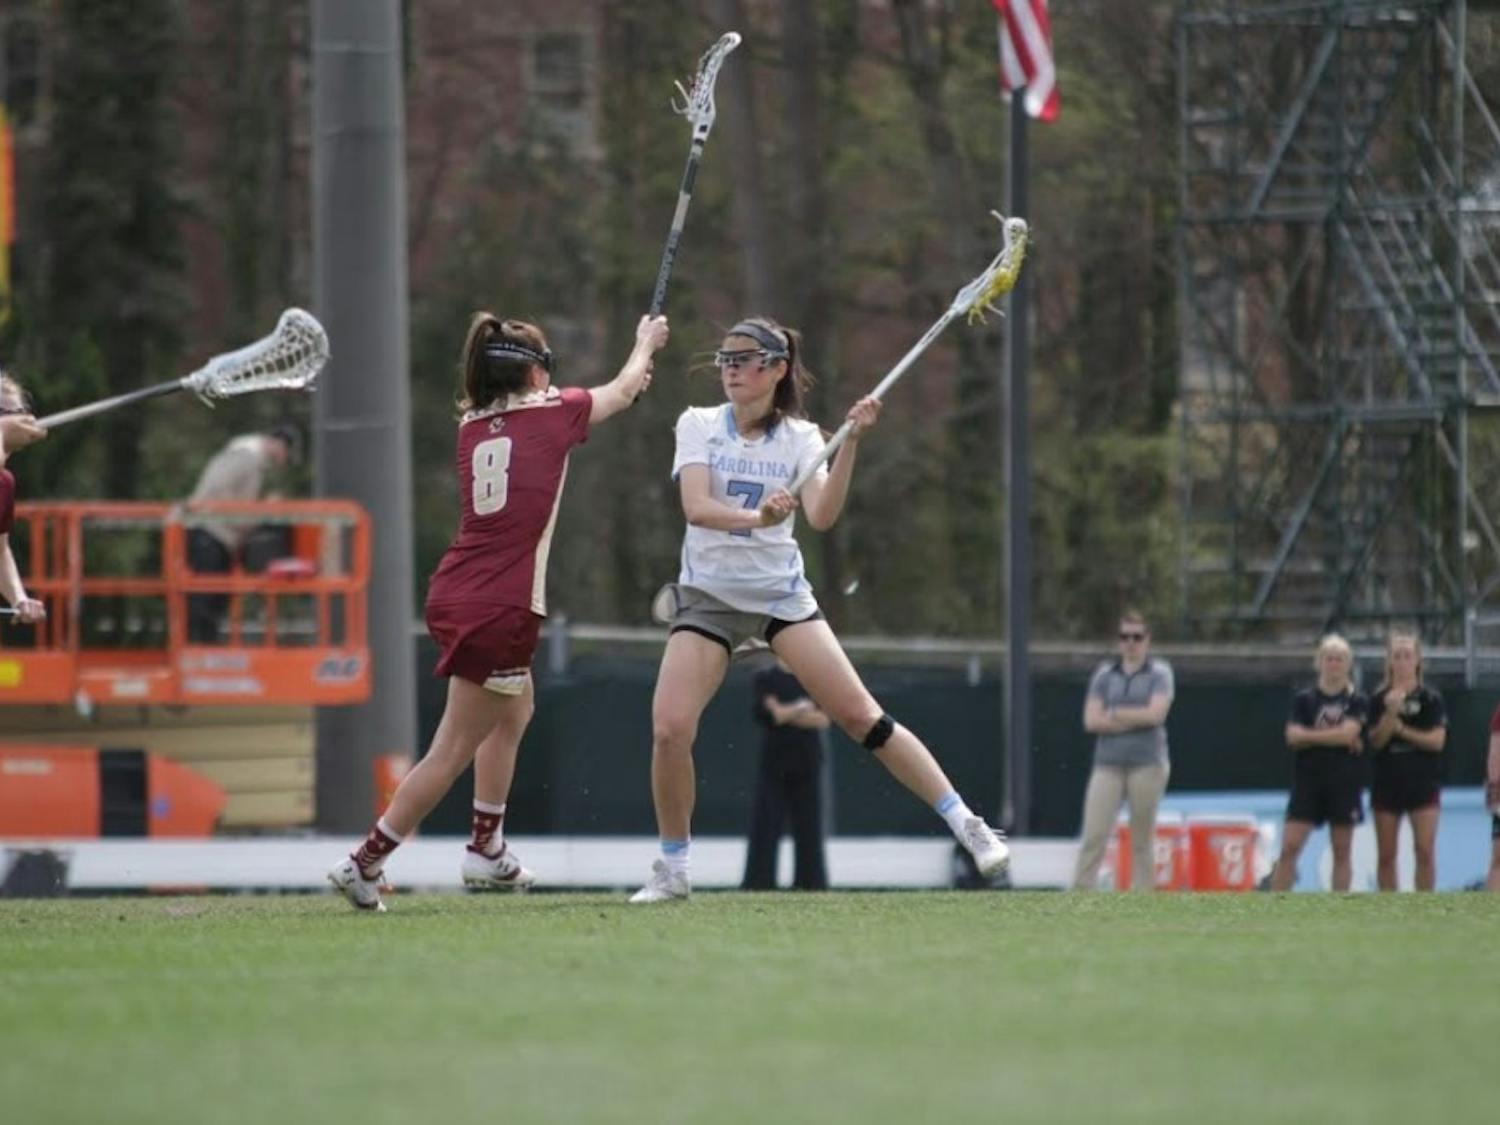 Midfielder Ela Hazar carries the ball up the field in the game against Boston College on March 25, 2017.